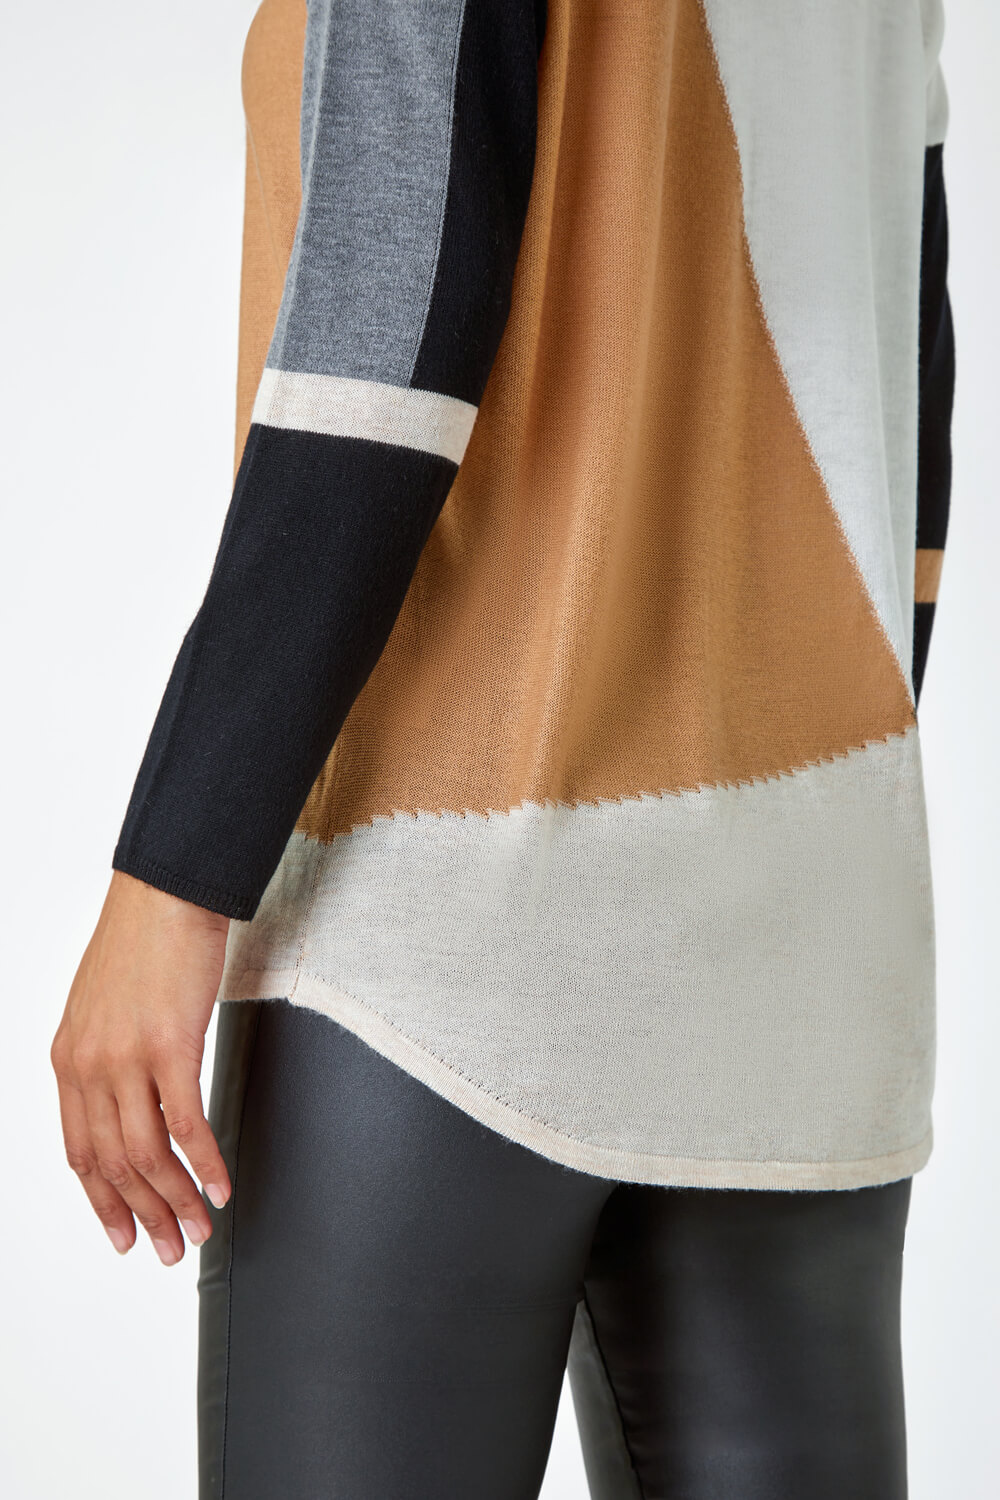 Tan Colour Block Knitted Jumper, Image 5 of 5